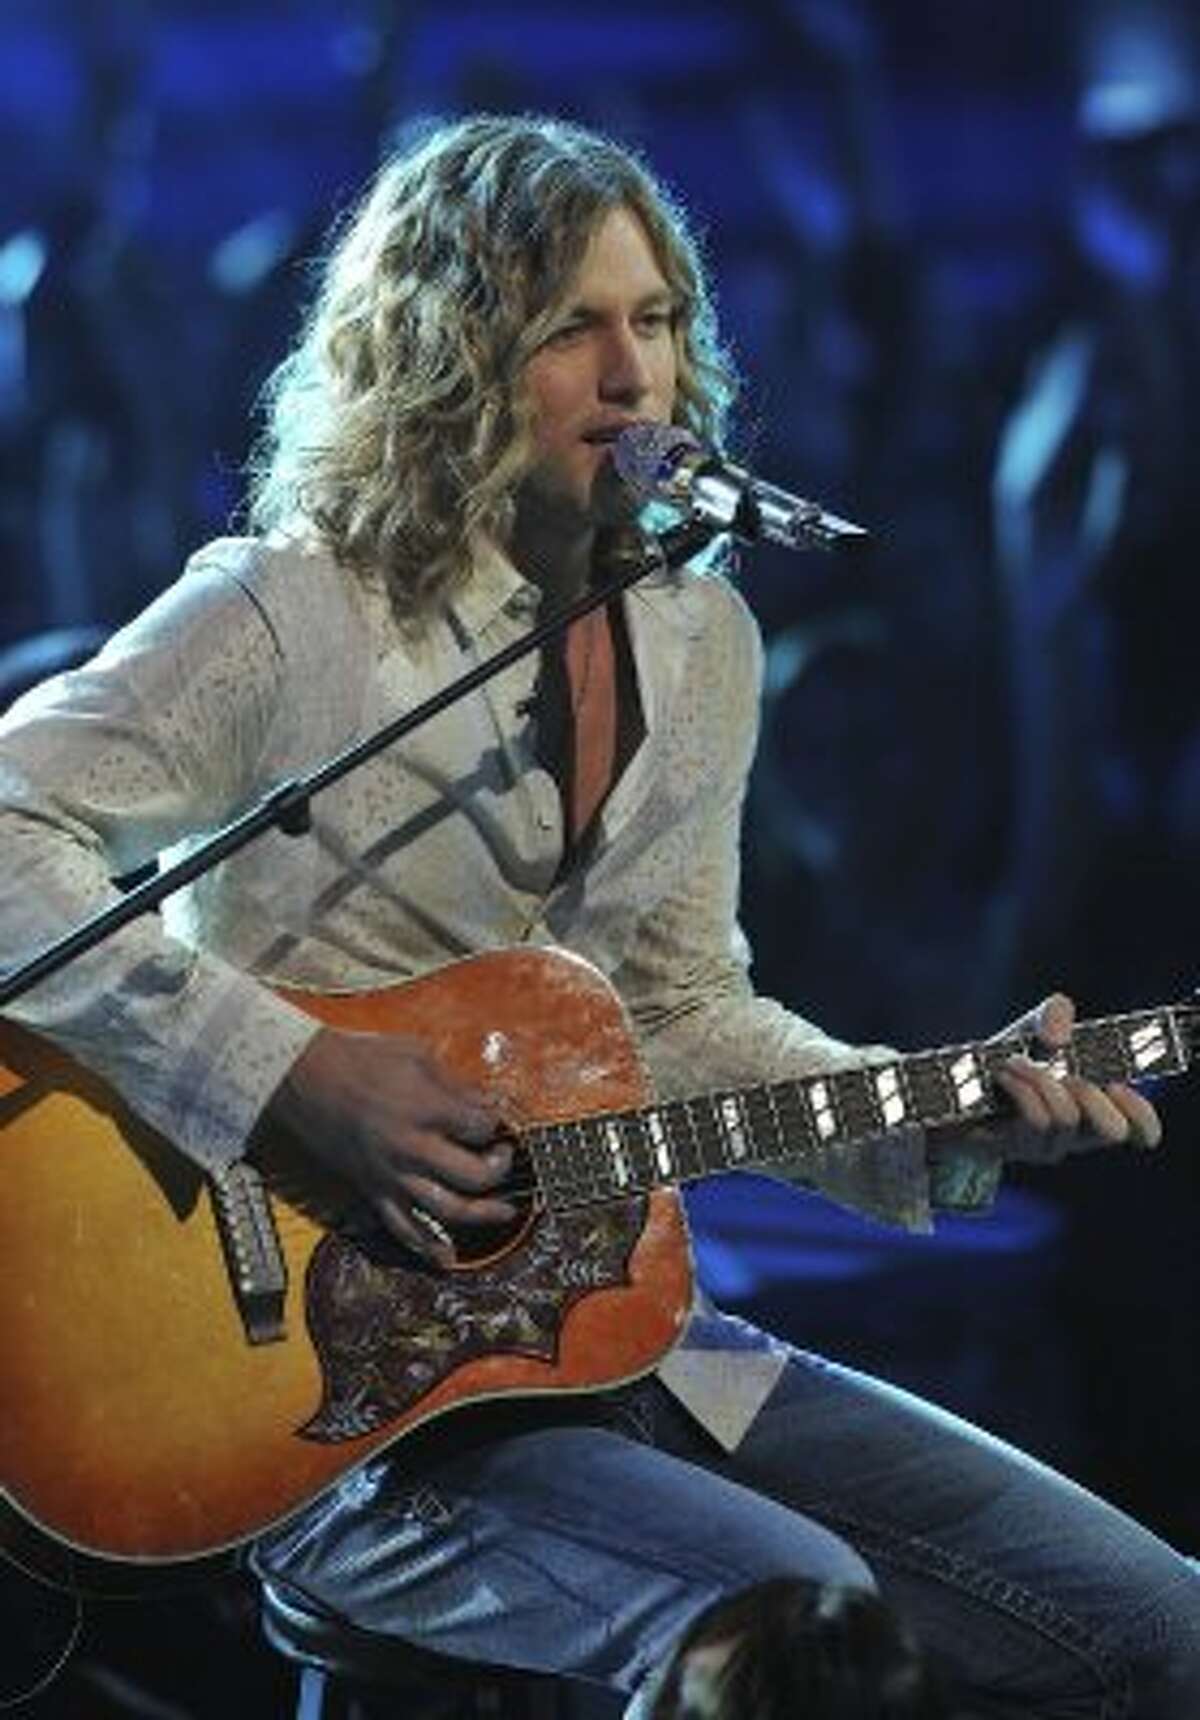 Casey James is from Fort Worth.